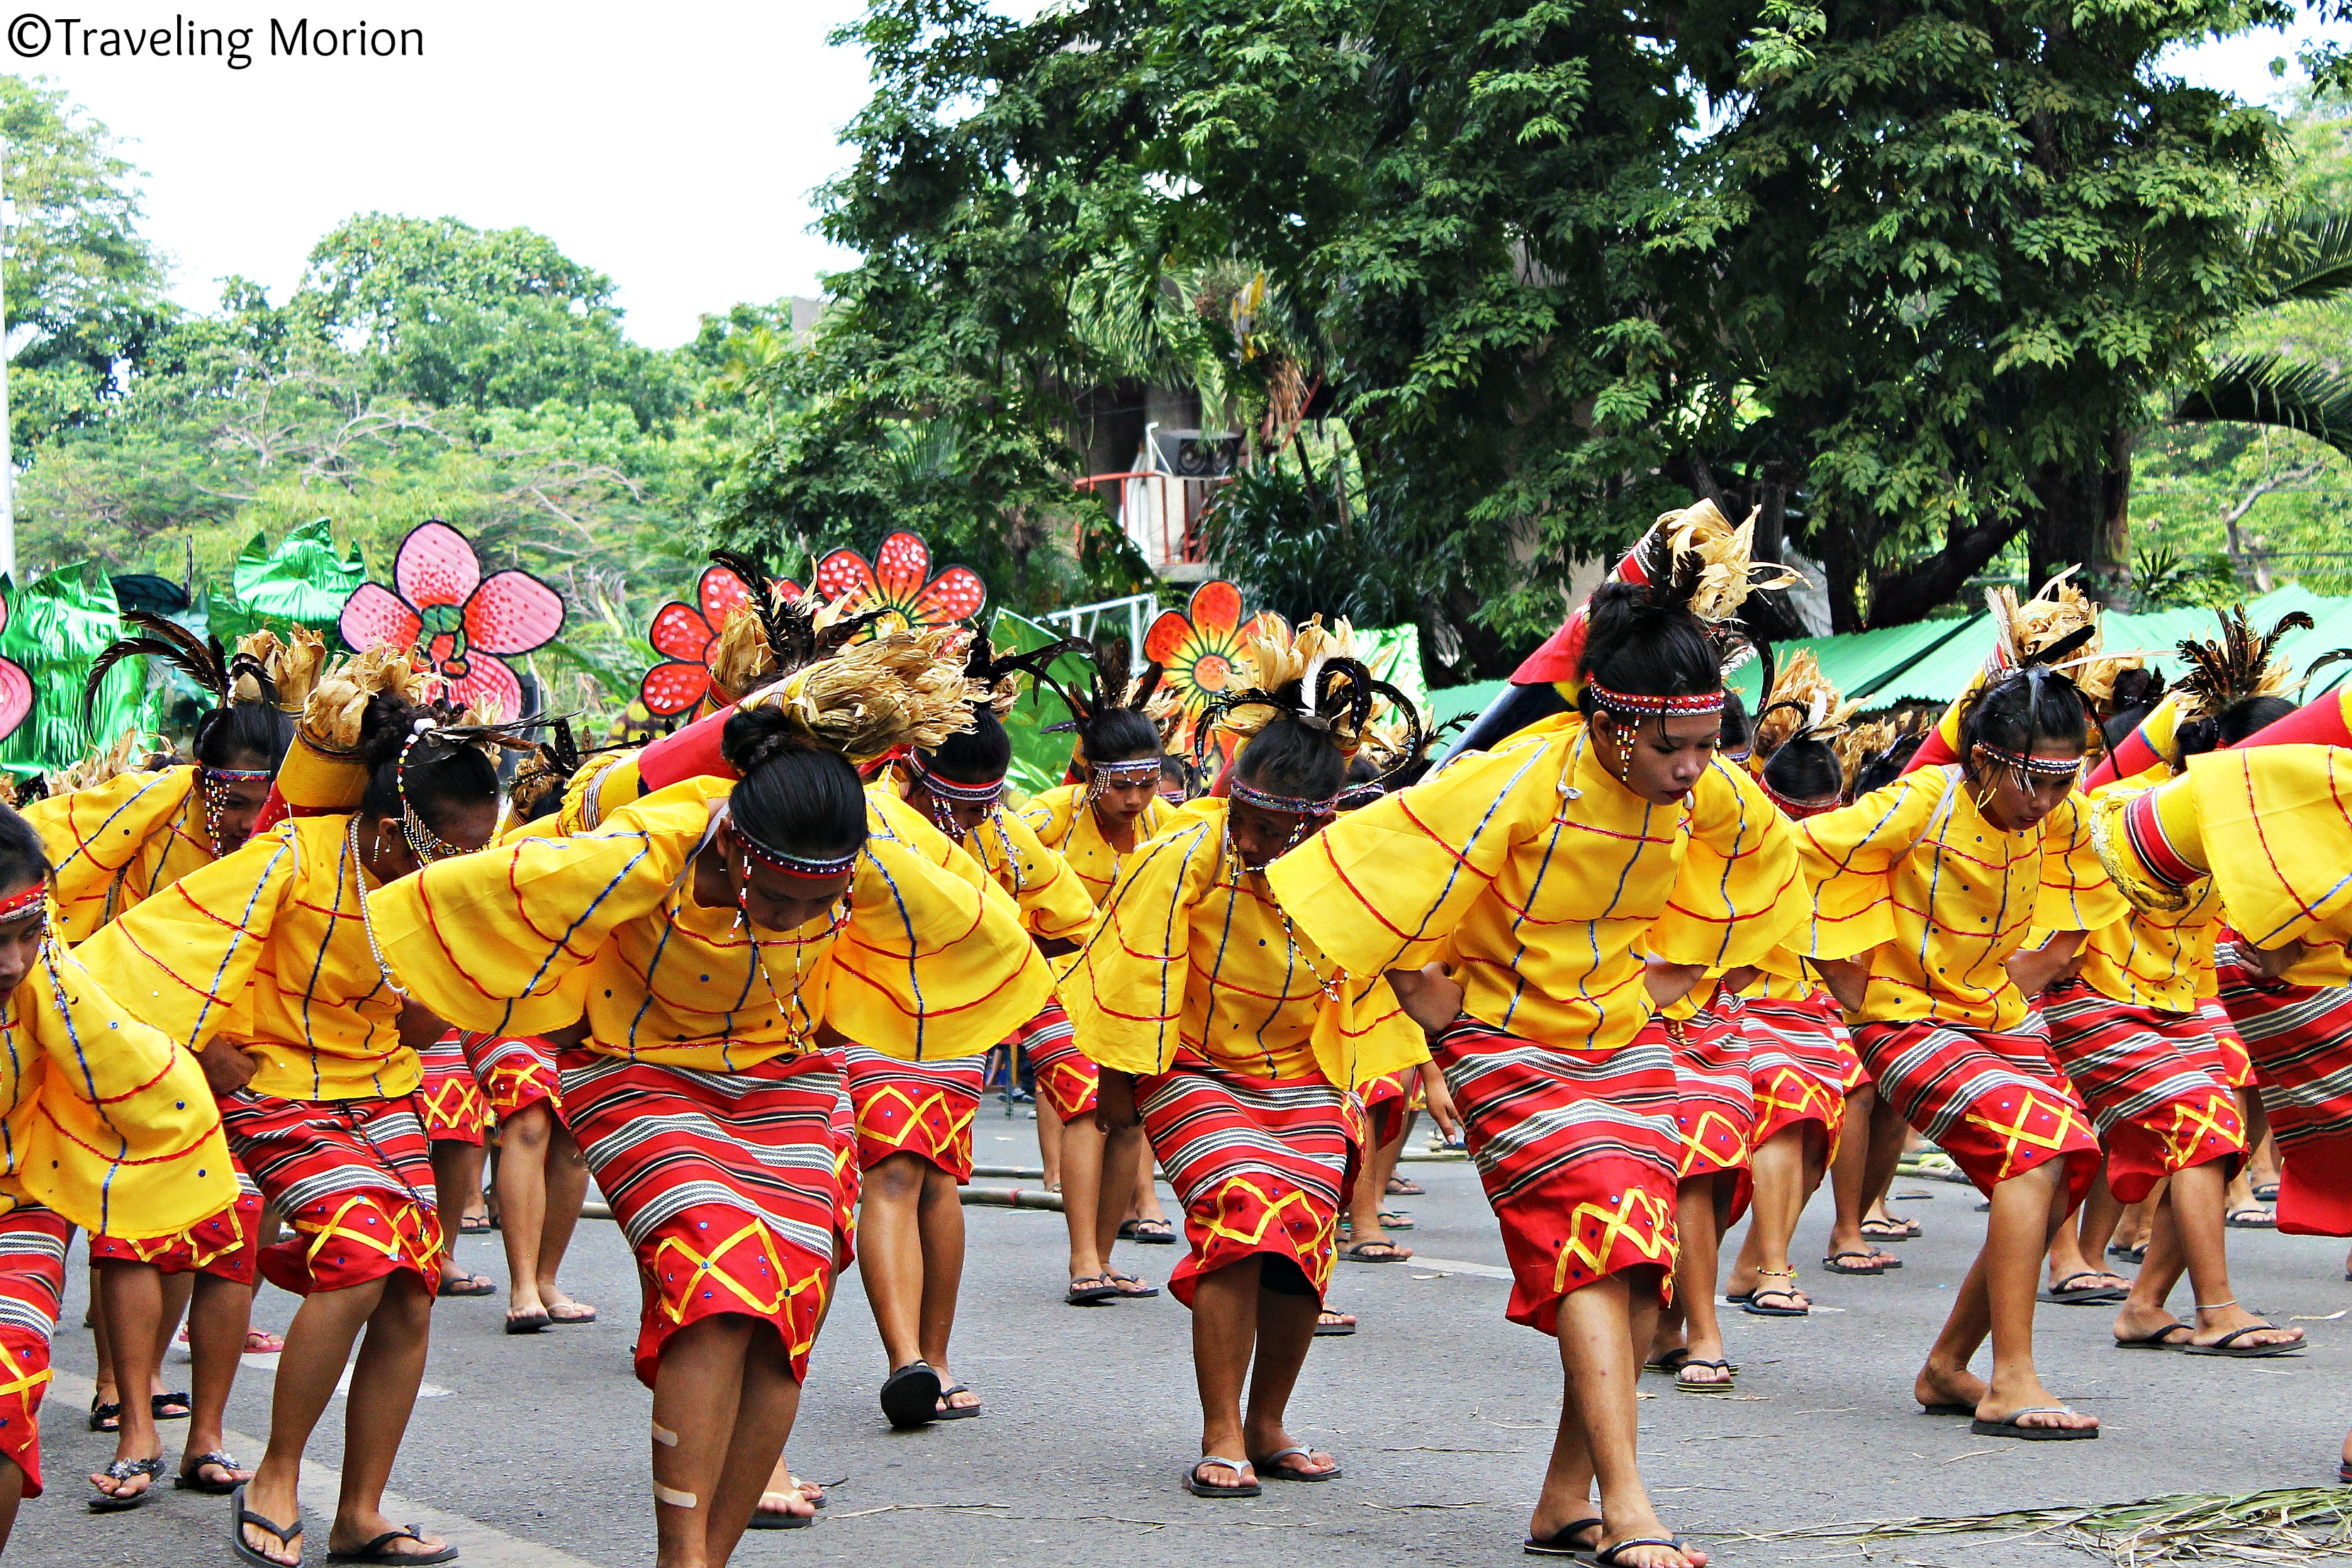 Traveling Morion | Travel + Photography: 7107 Islands’ Fiesta| The ...